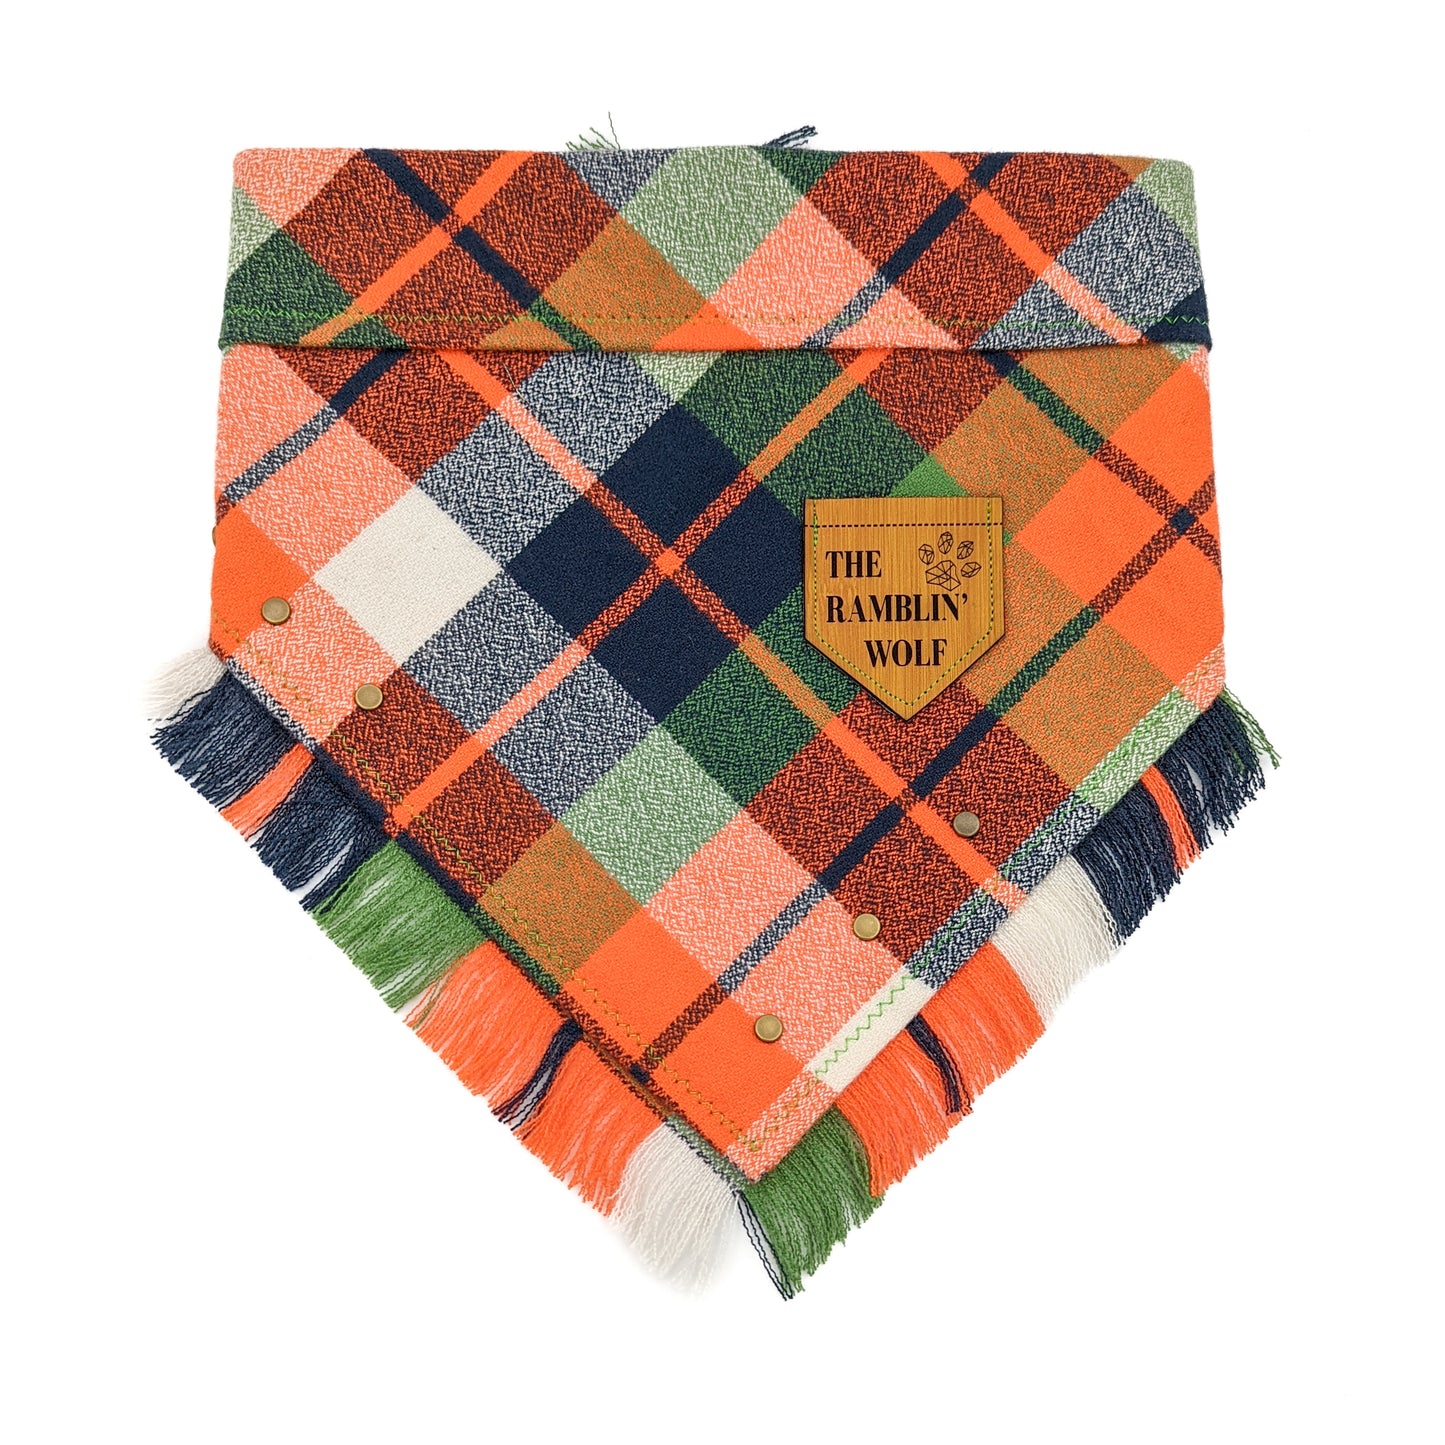 STARS AND STORIES Flannel Bandana